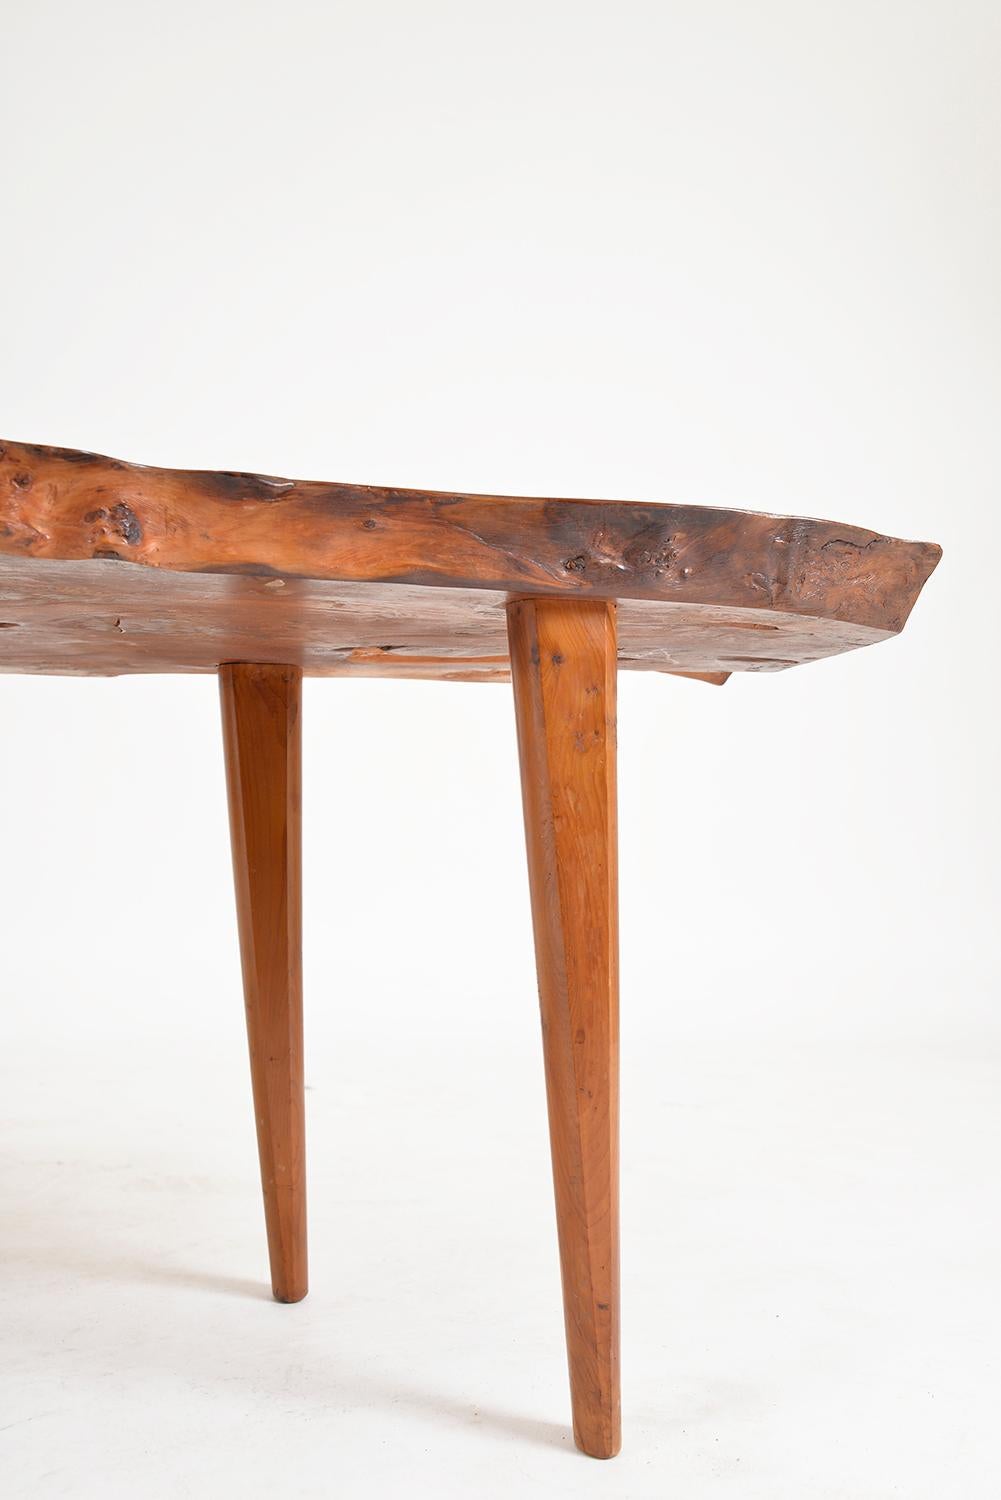 Mid-20th Century Yew Wood Live Edge Plank Coffee Table by Reynolds of Ludlow English 1950s 1960s